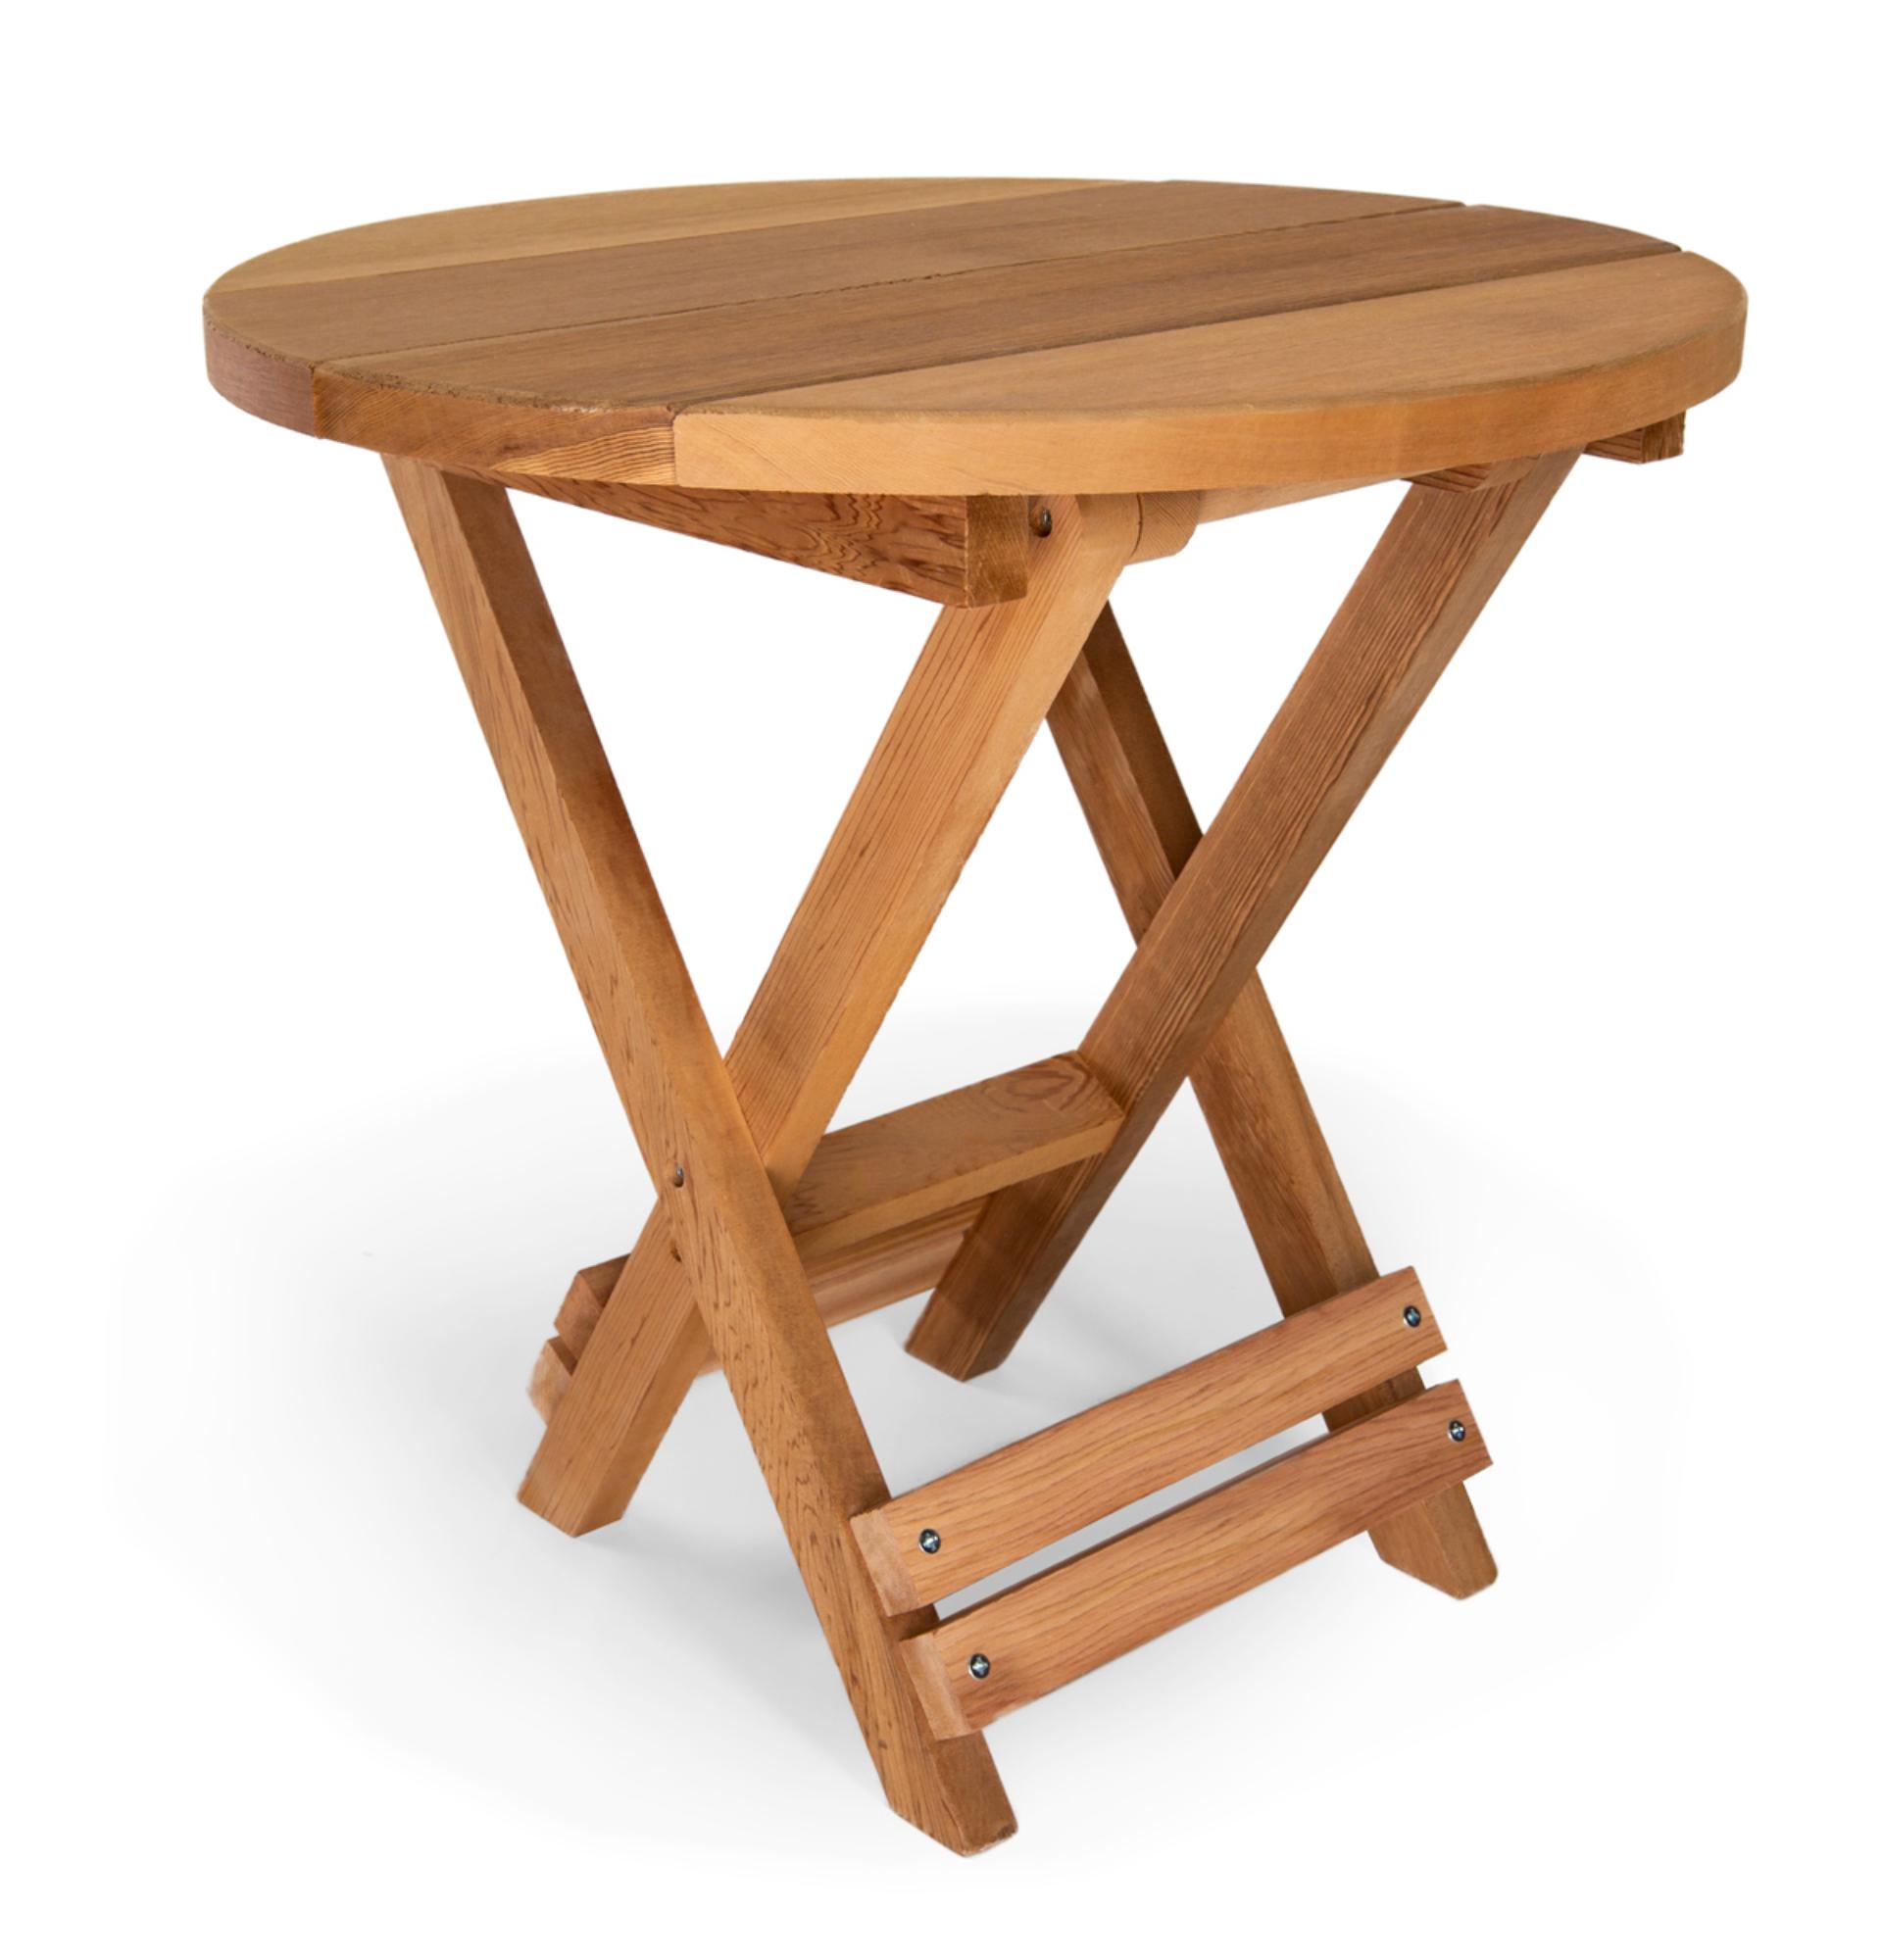 Folding Andy Table